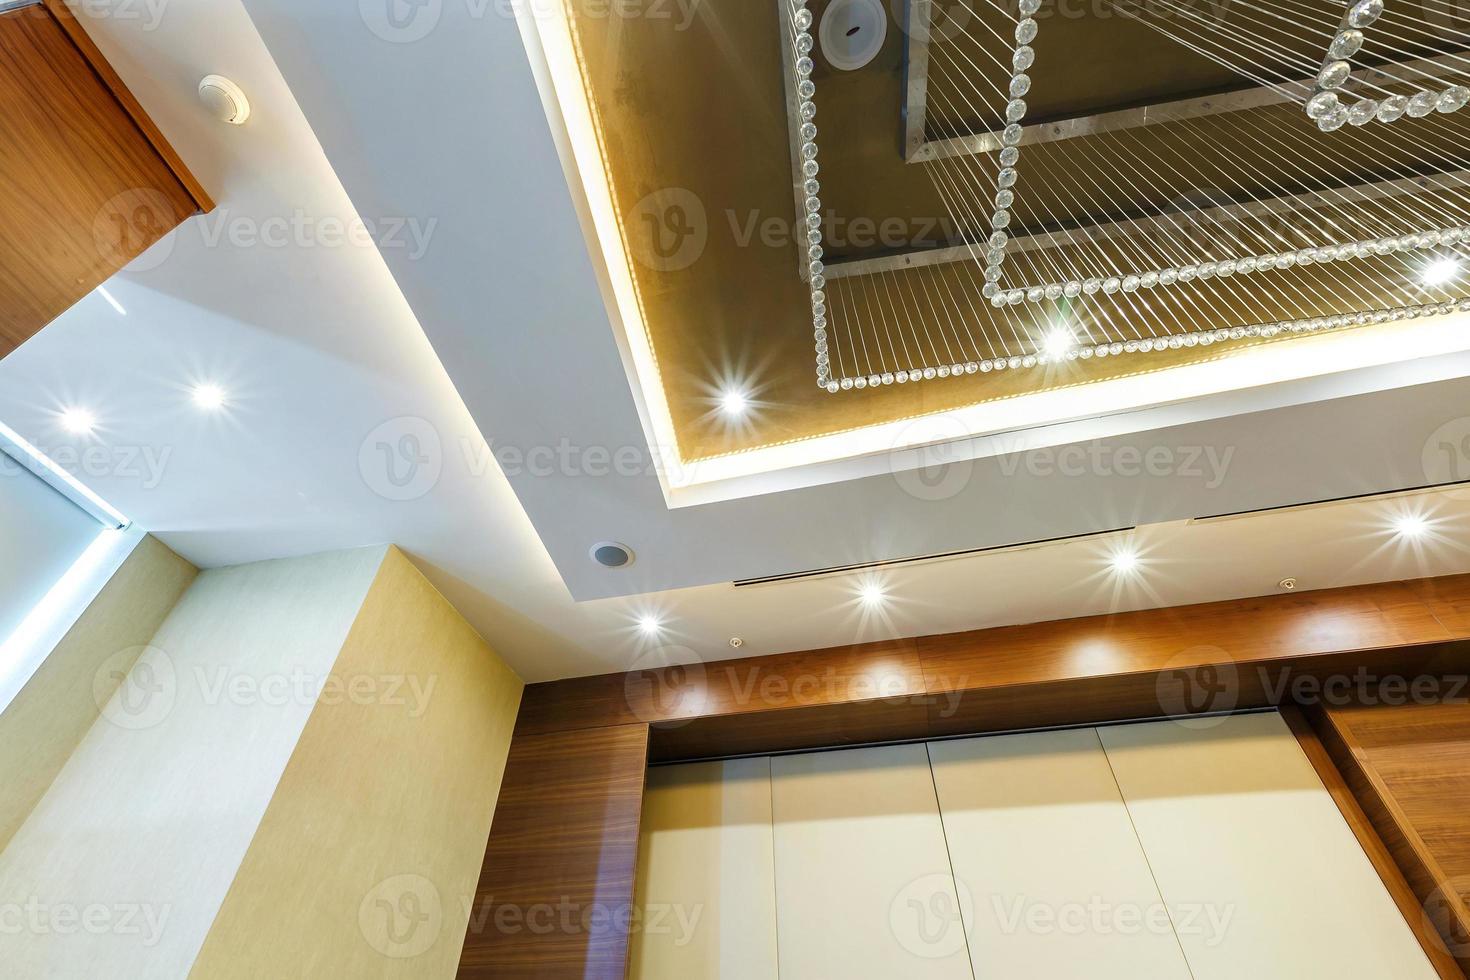 look up on suspended ceiling with halogen spots lamps and drywall construction with fire alarm sensor in empty room in apartment or house. Stretch ceiling white and complex shape. photo